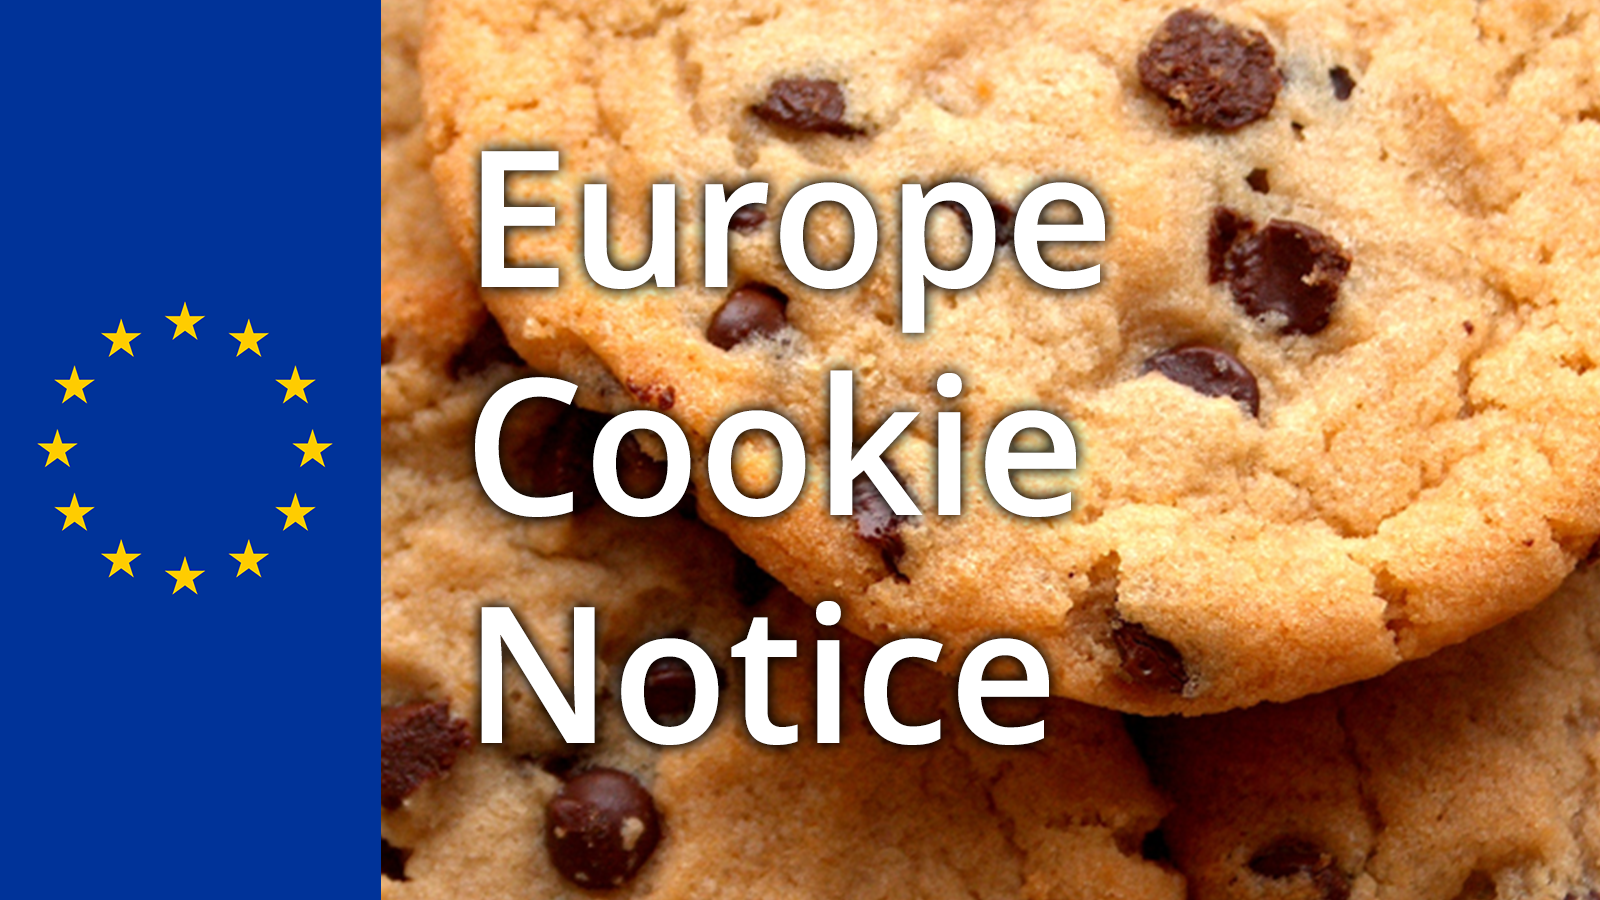 Europe Cookie Notice on Shopify store